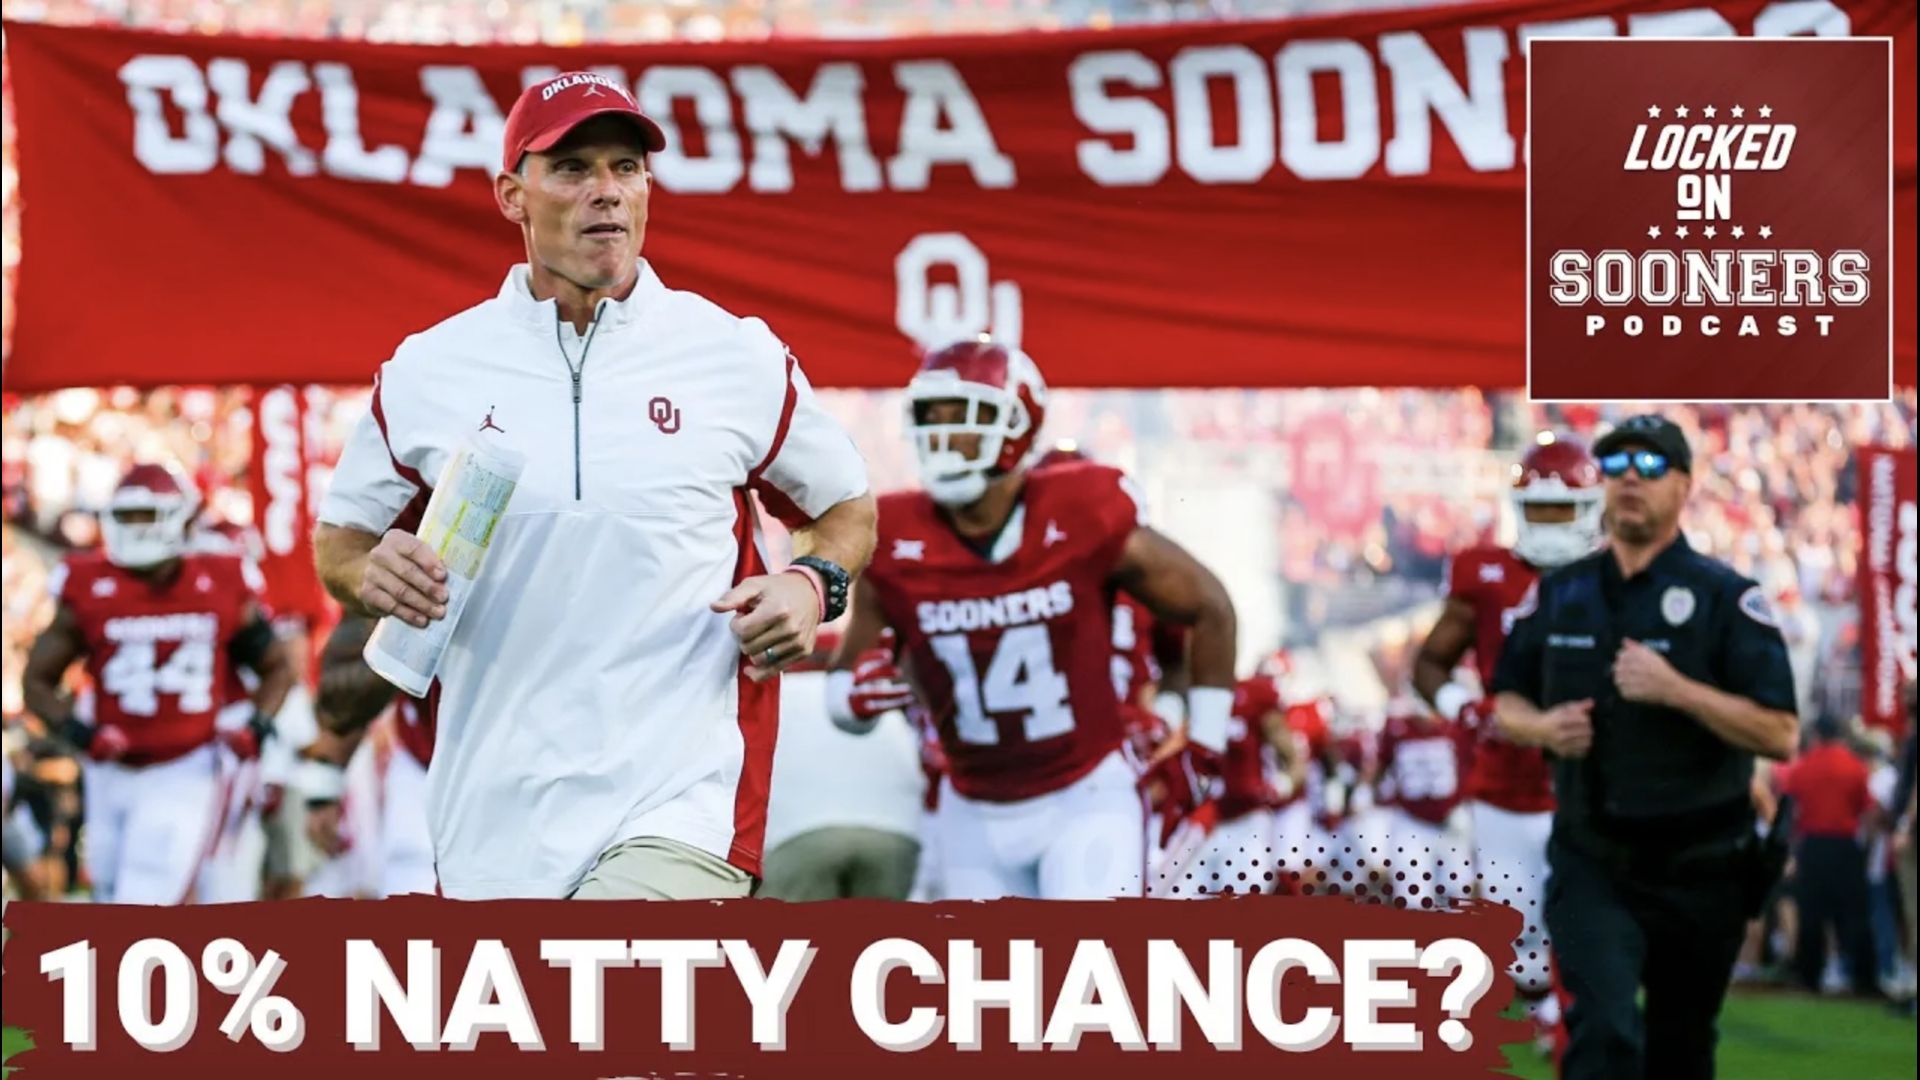 Greg McElroy of ESPN gives the Oklahoma Sooners a 10% chance to win the national title under Brent Venables. Is that high or low or just right?